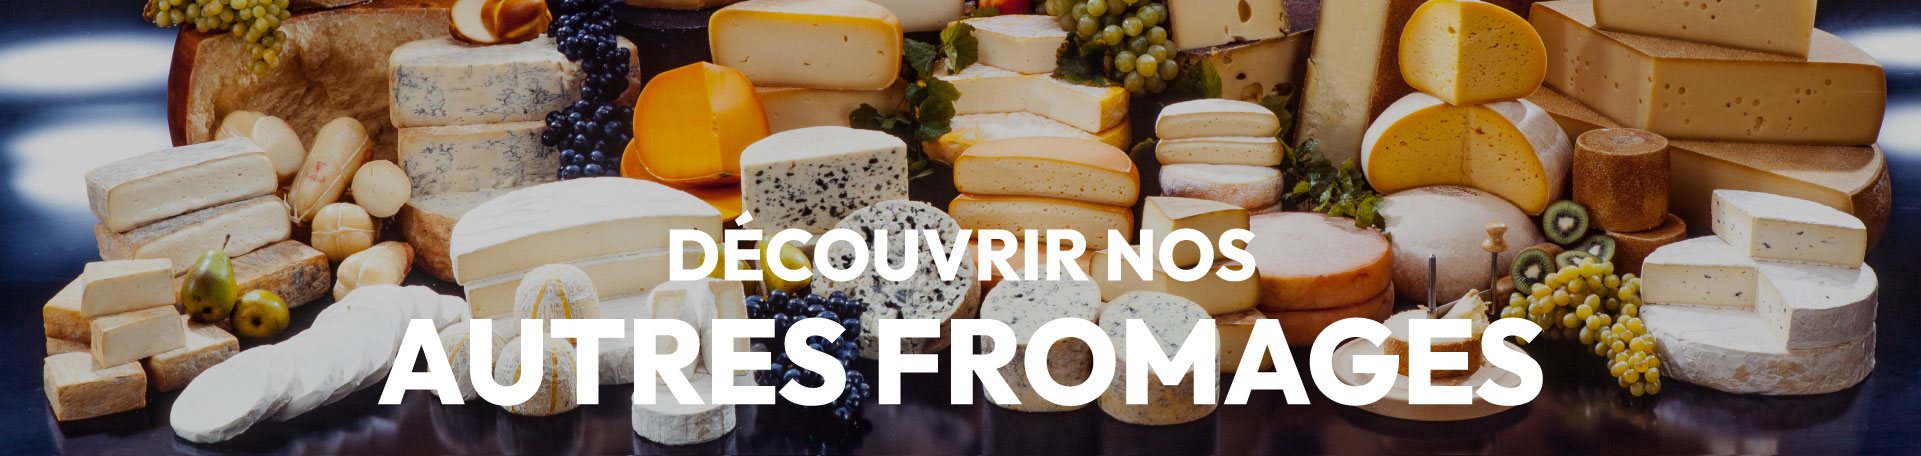 Autres fromages